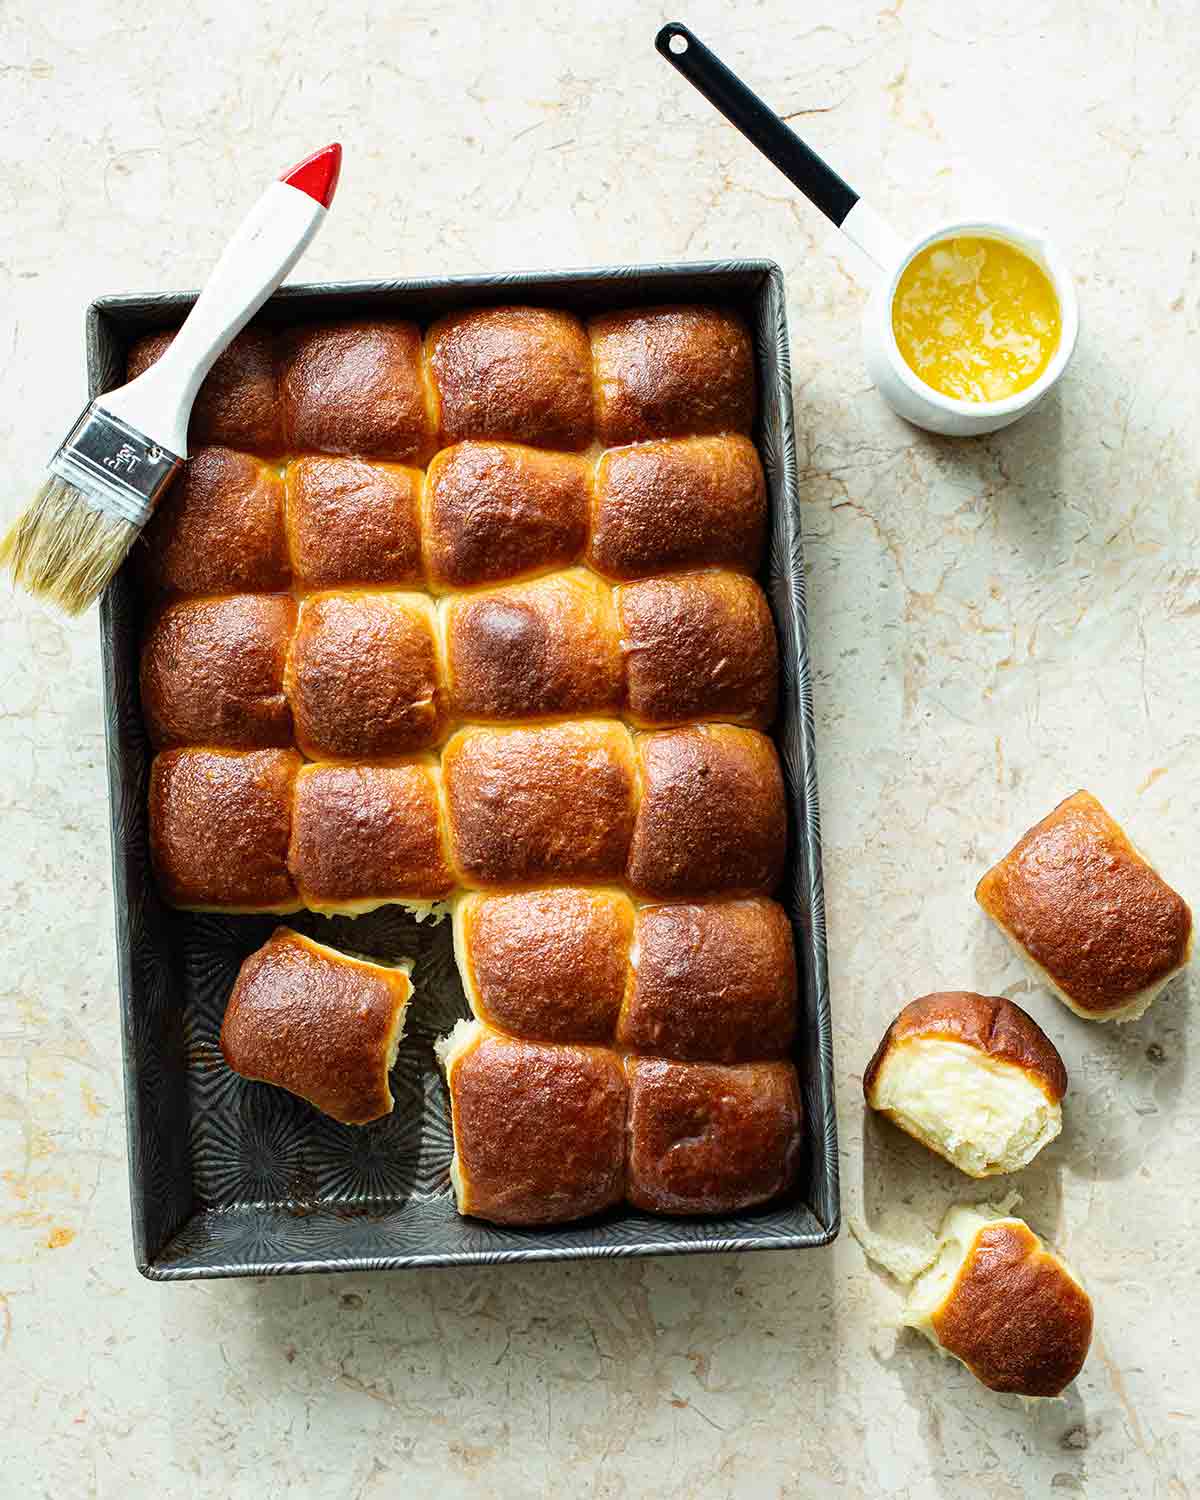 A rectangular pan of icebox rolls with a pastry brush resting on the side and a small dish of butter